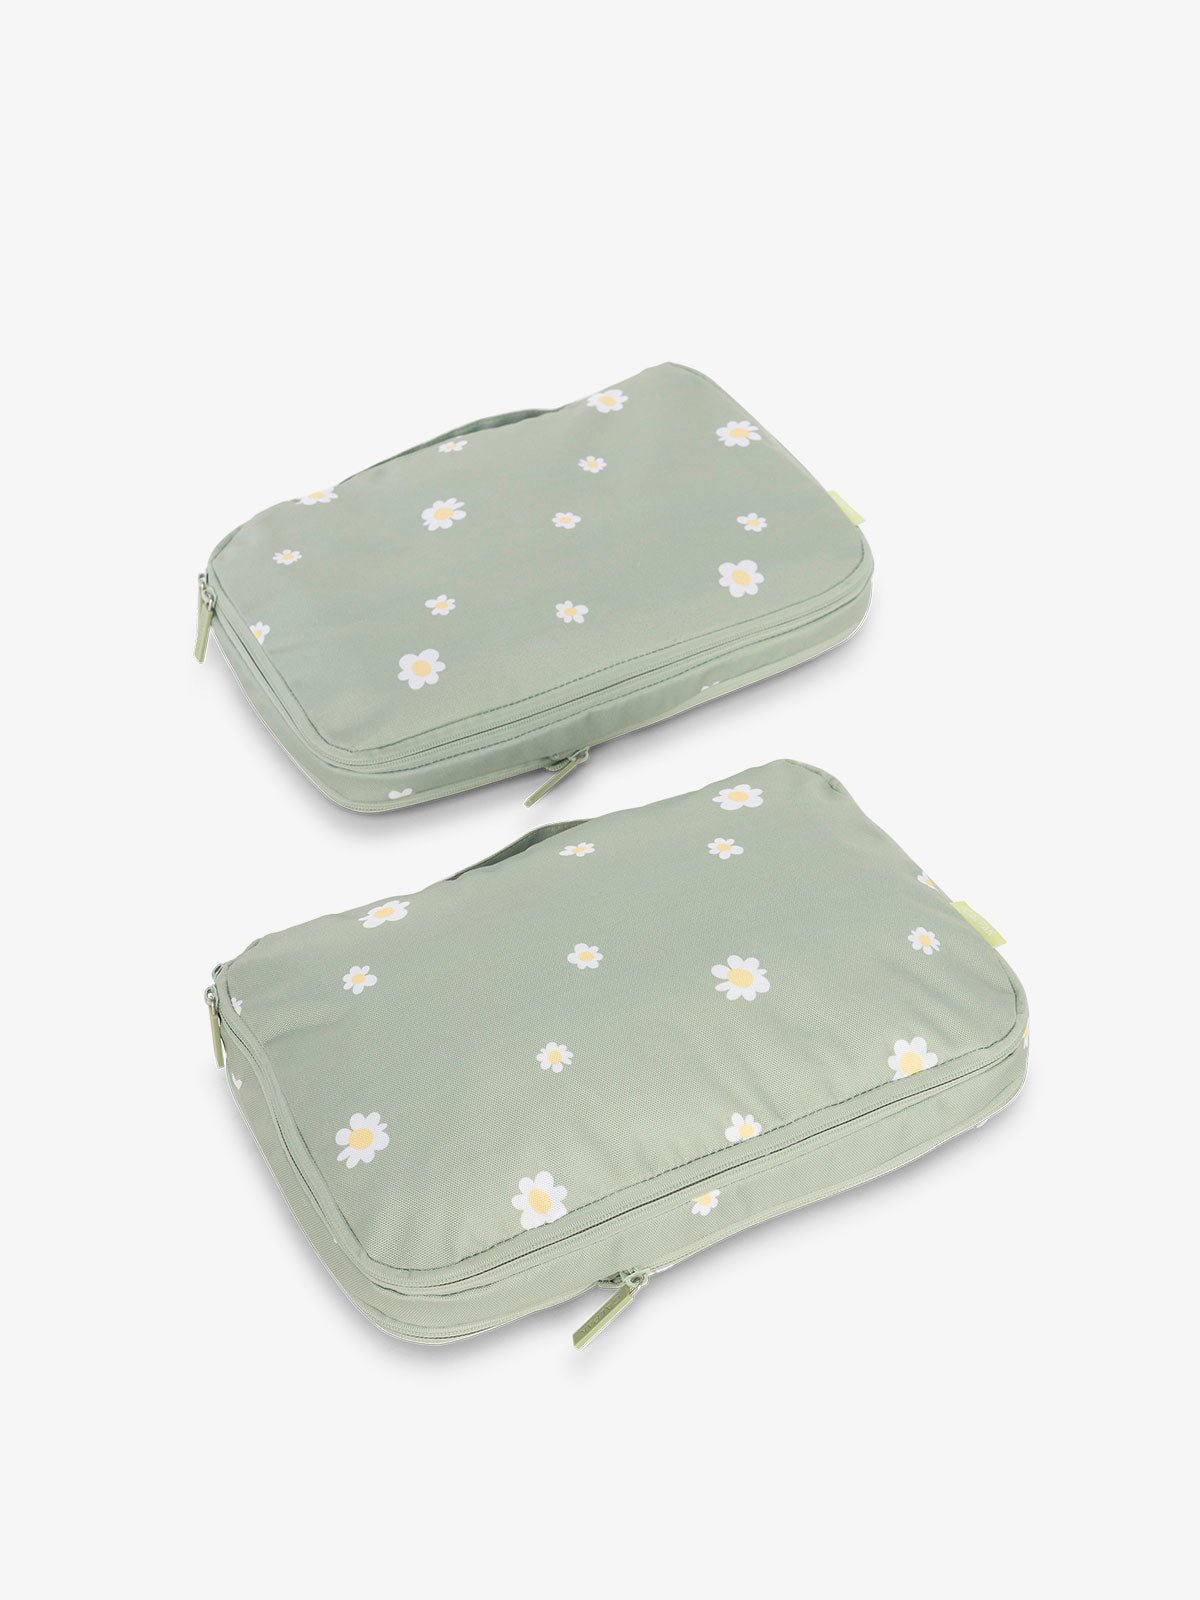 CALPAK compression packing cubes in daisy